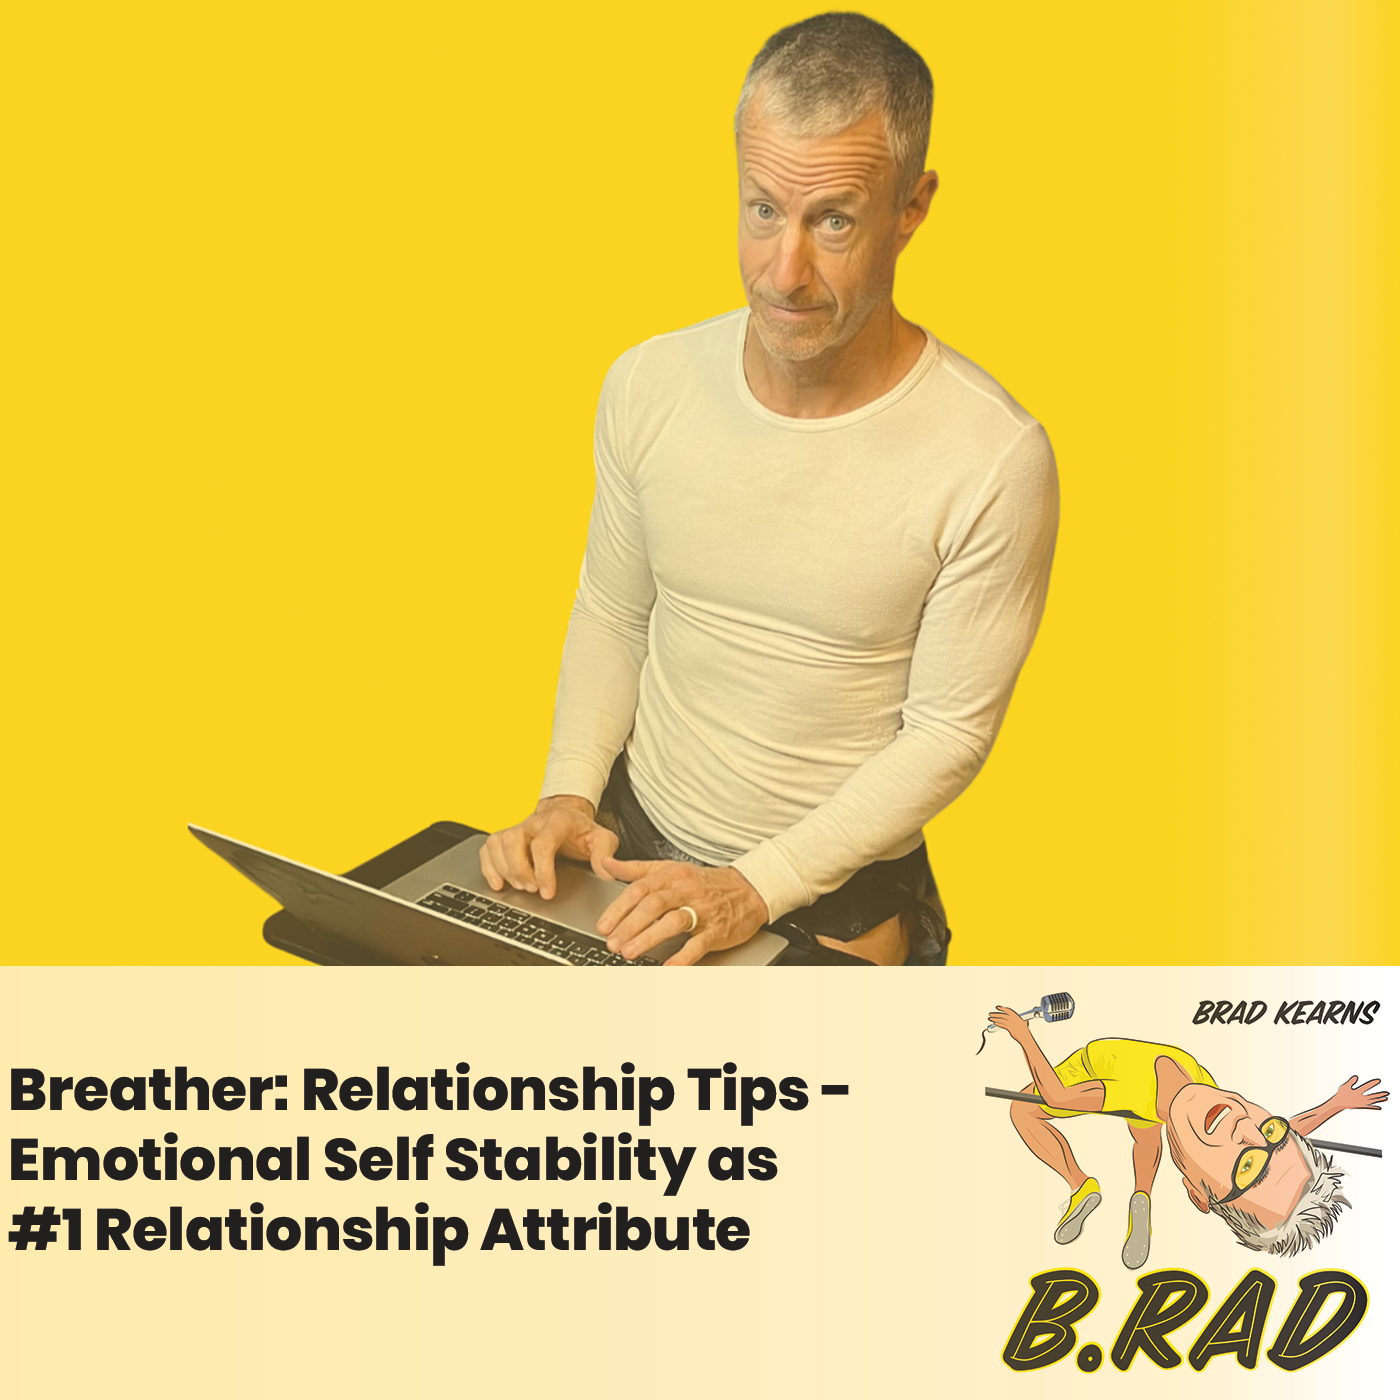 Breather: Relationship Tips - Emotional Self Stability as #1 Relationship Attribute